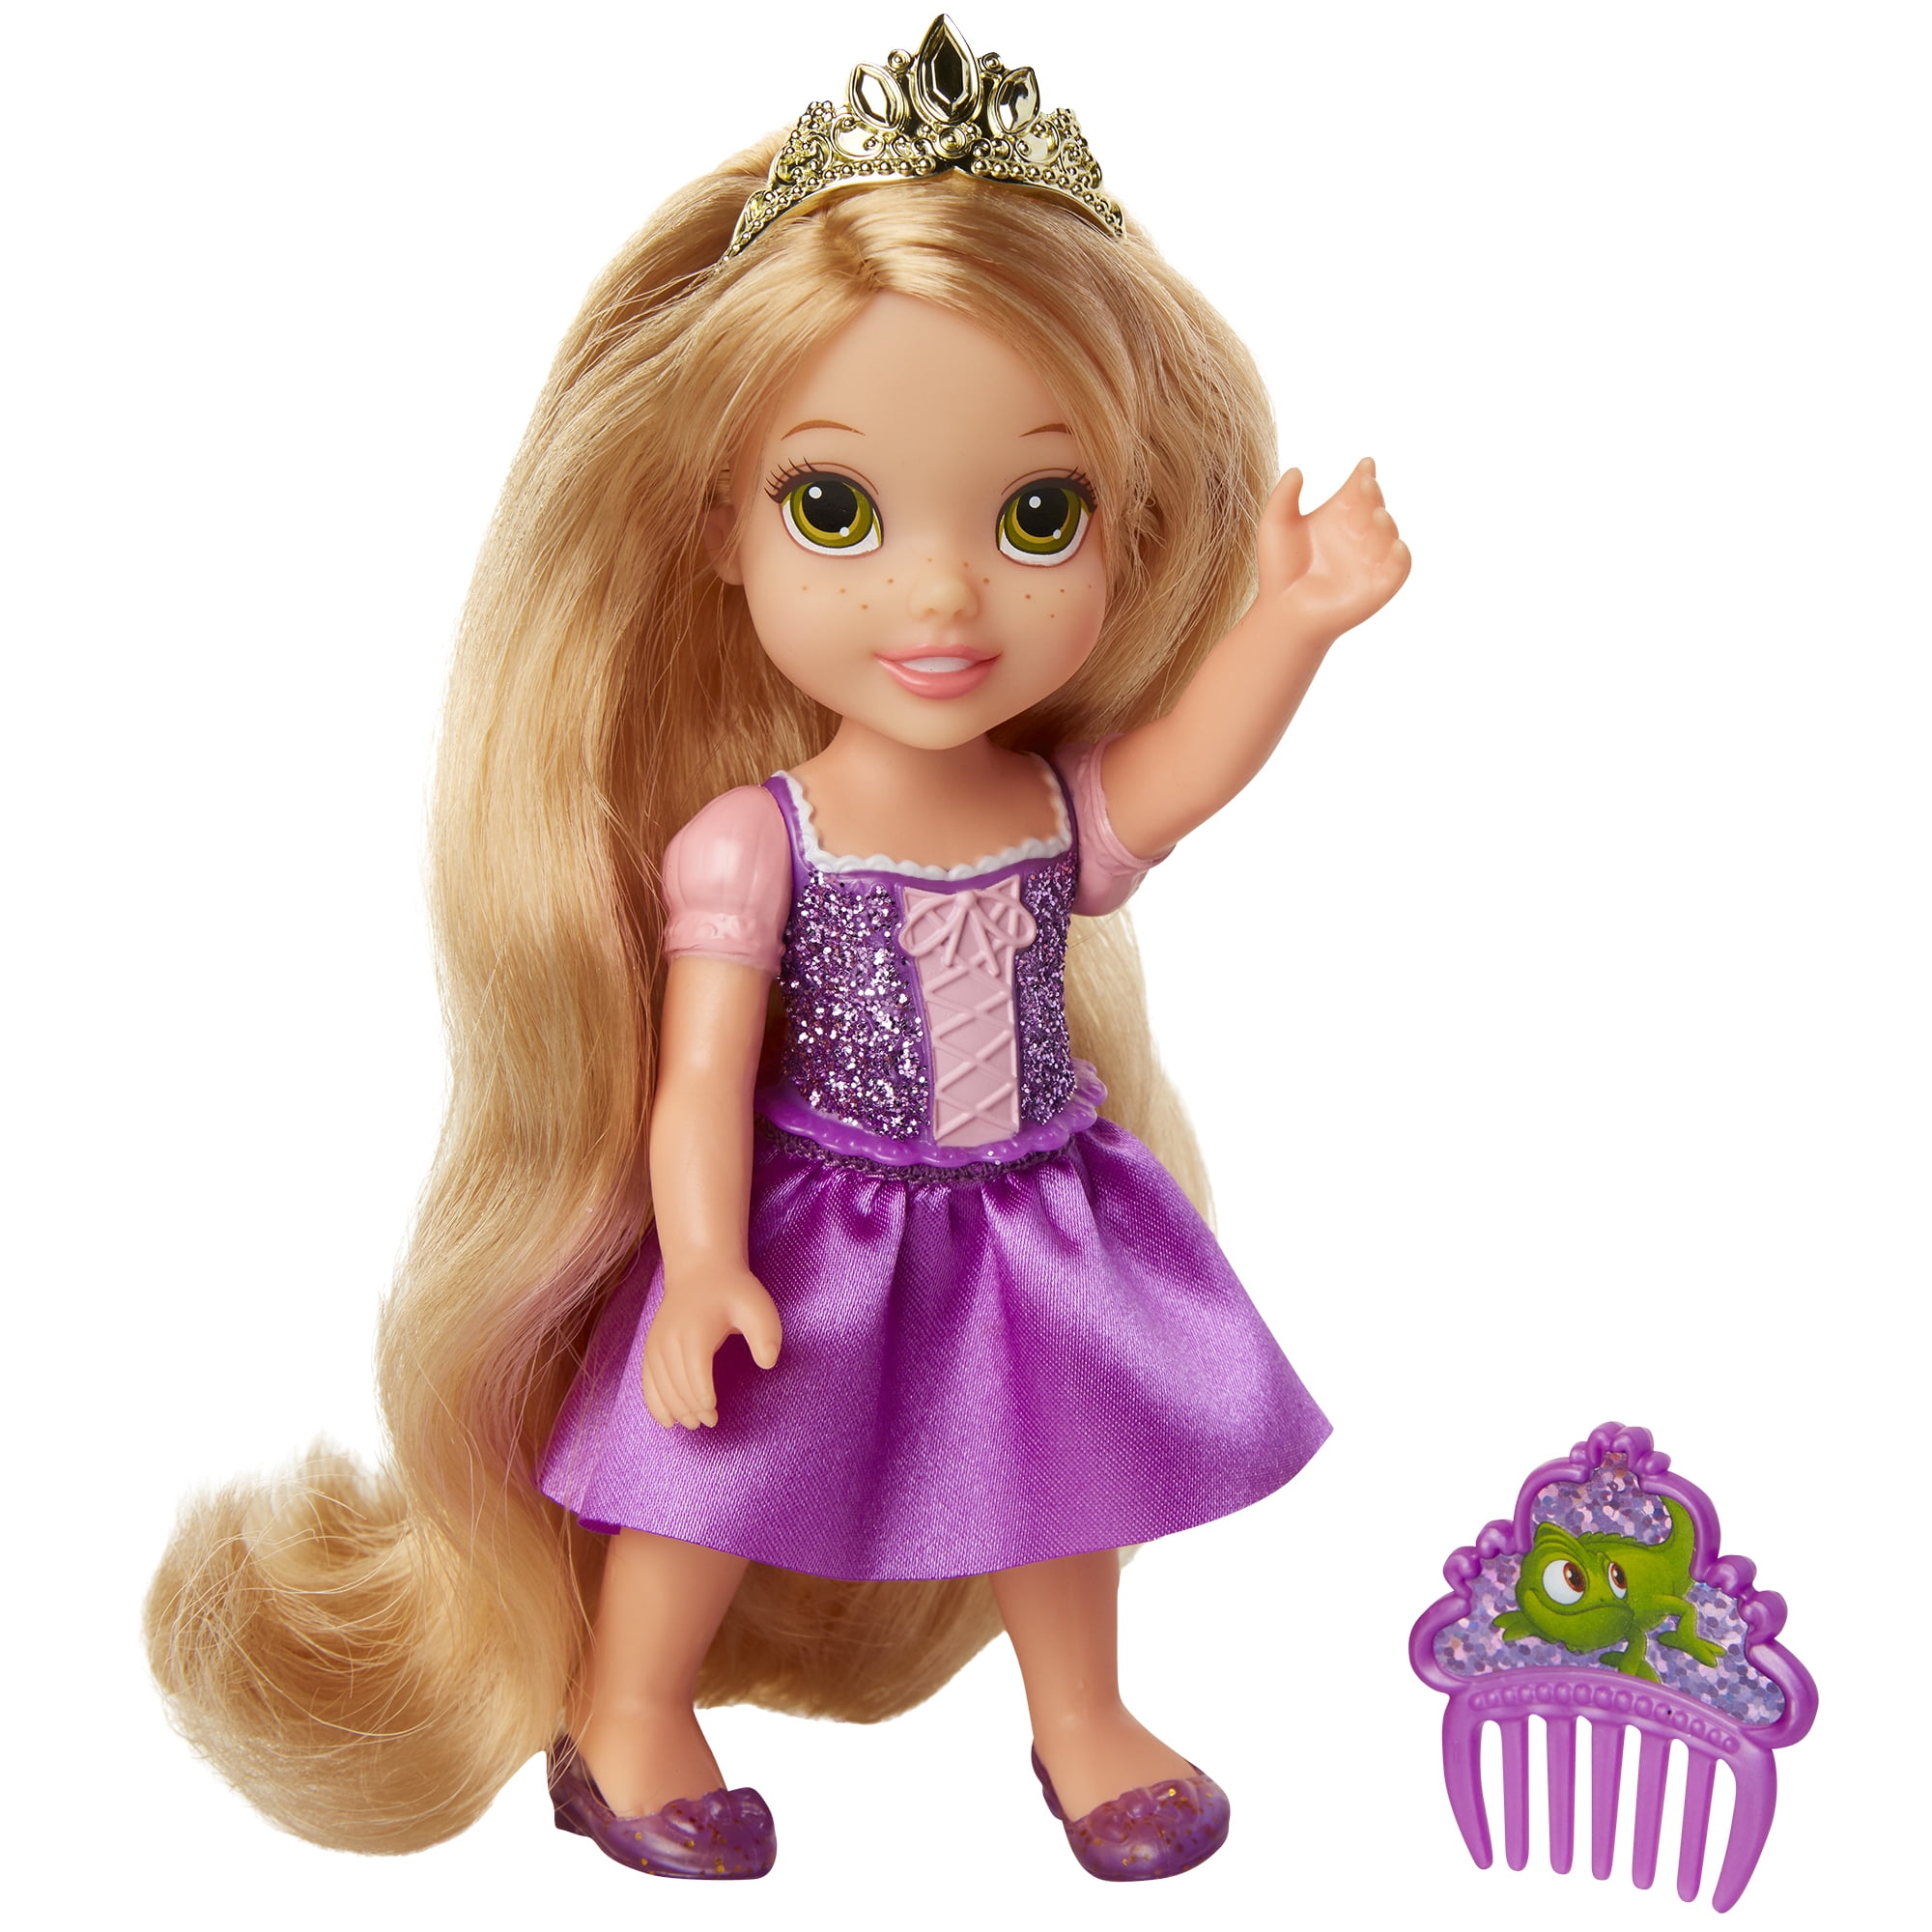 Disney Frozen Princess Anna 6 in Petite Doll With Glittered Hard Bodice and Comb for sale online 